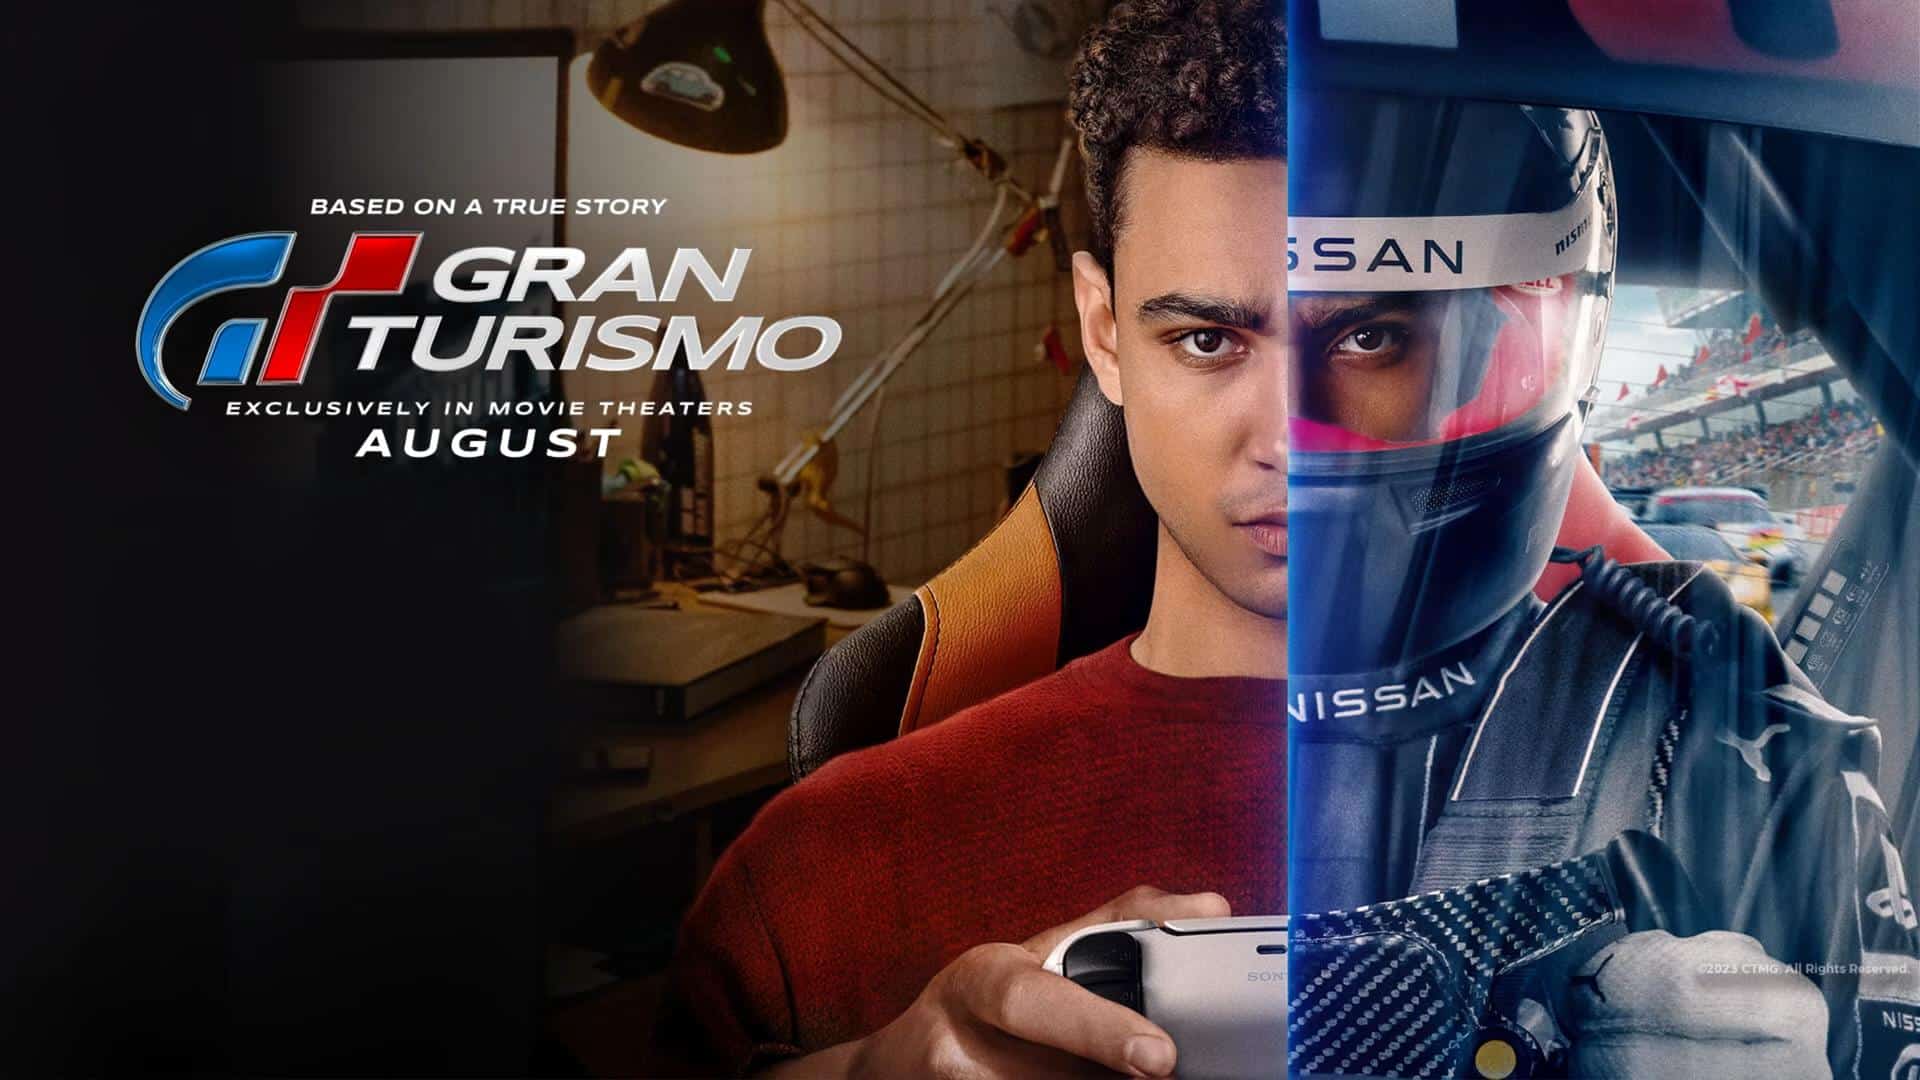 The Gran Turismo Movie will release from 11th August